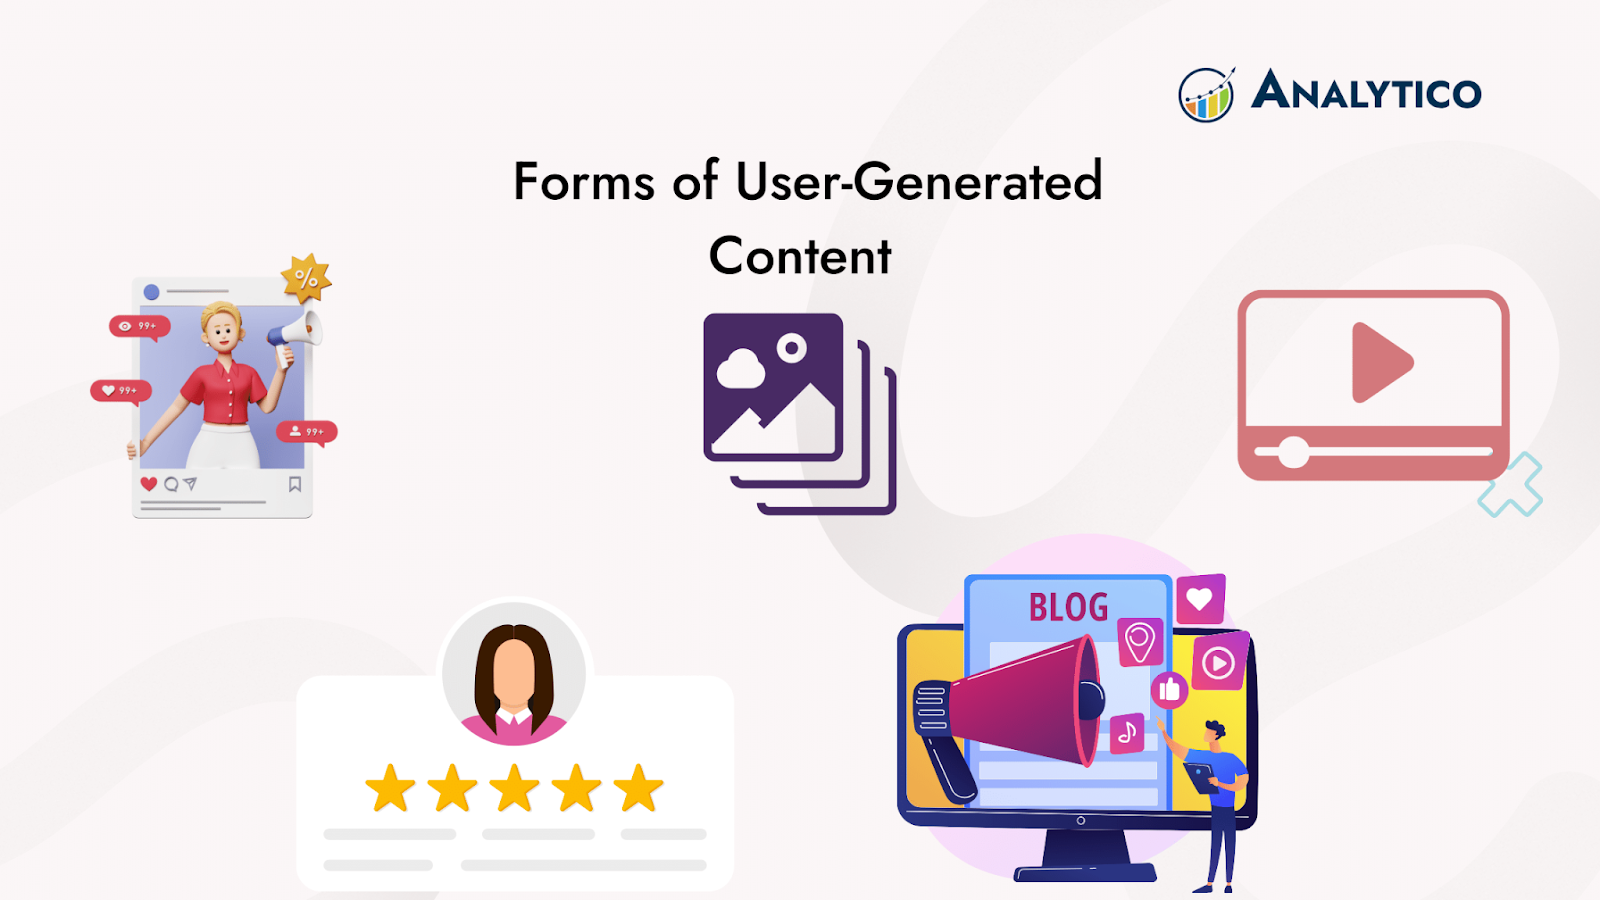 Forms of User-Generated Content